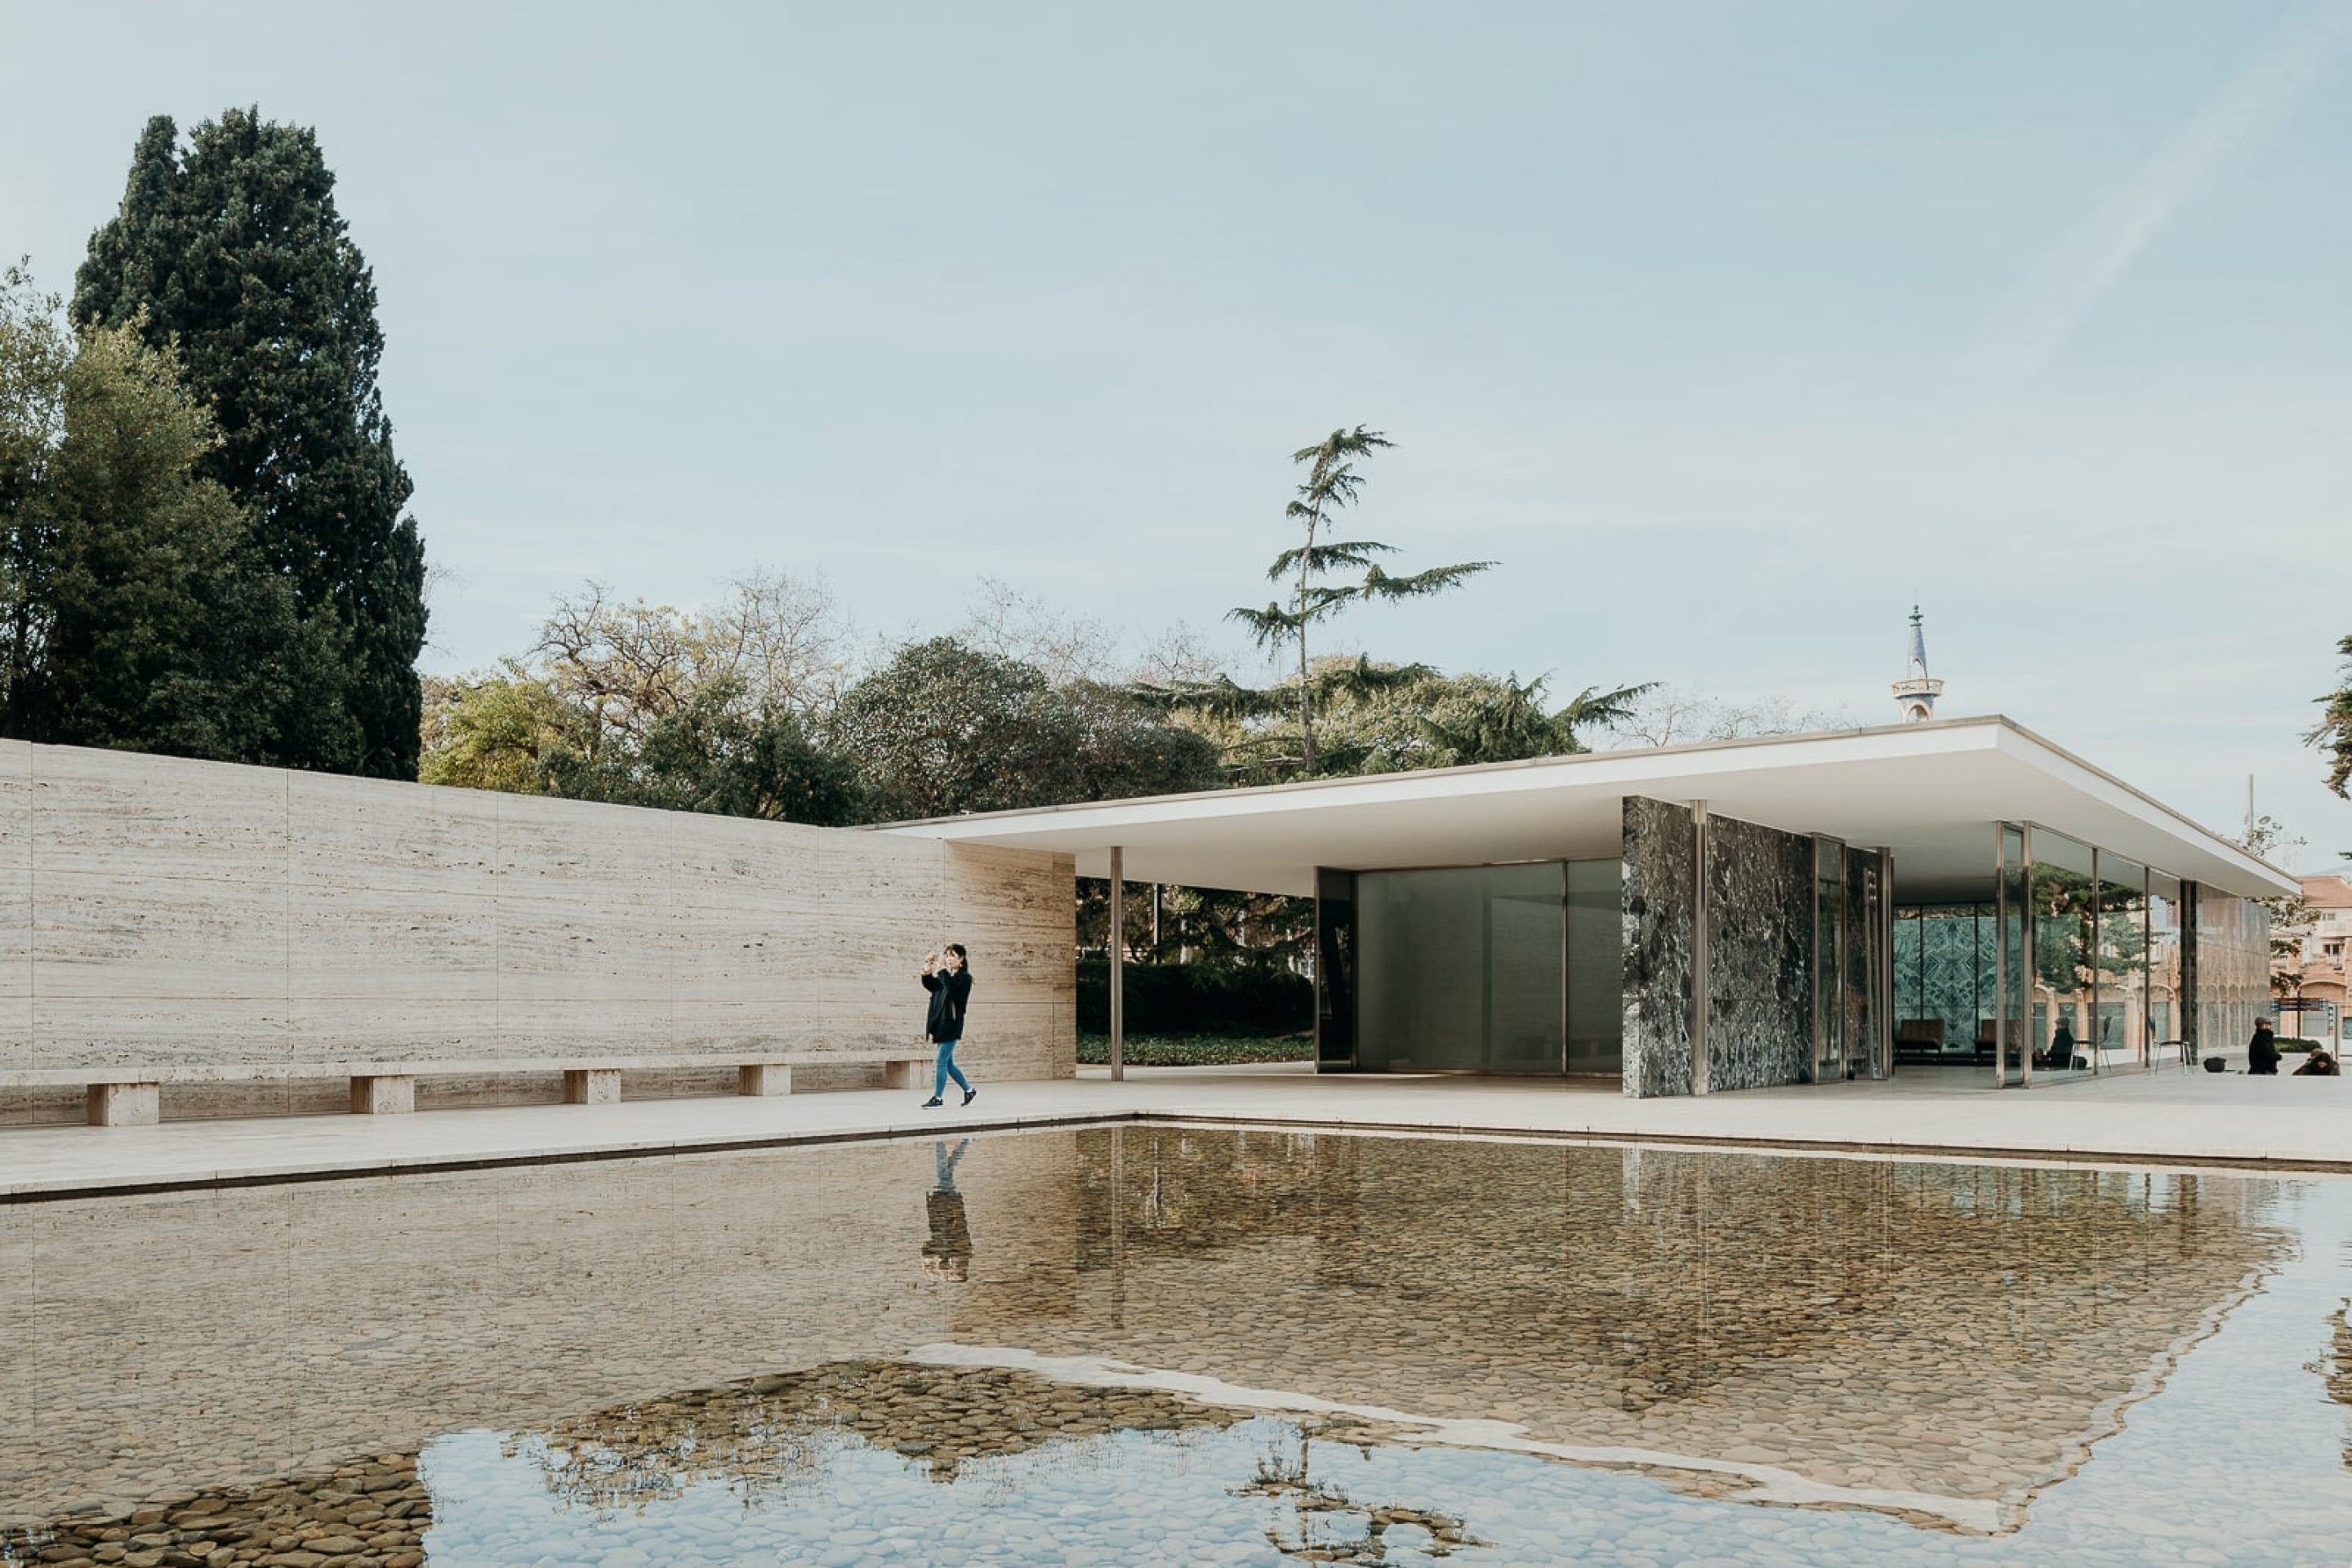  Barcelona Pavilion By Mies Van Der Rohe (1929)